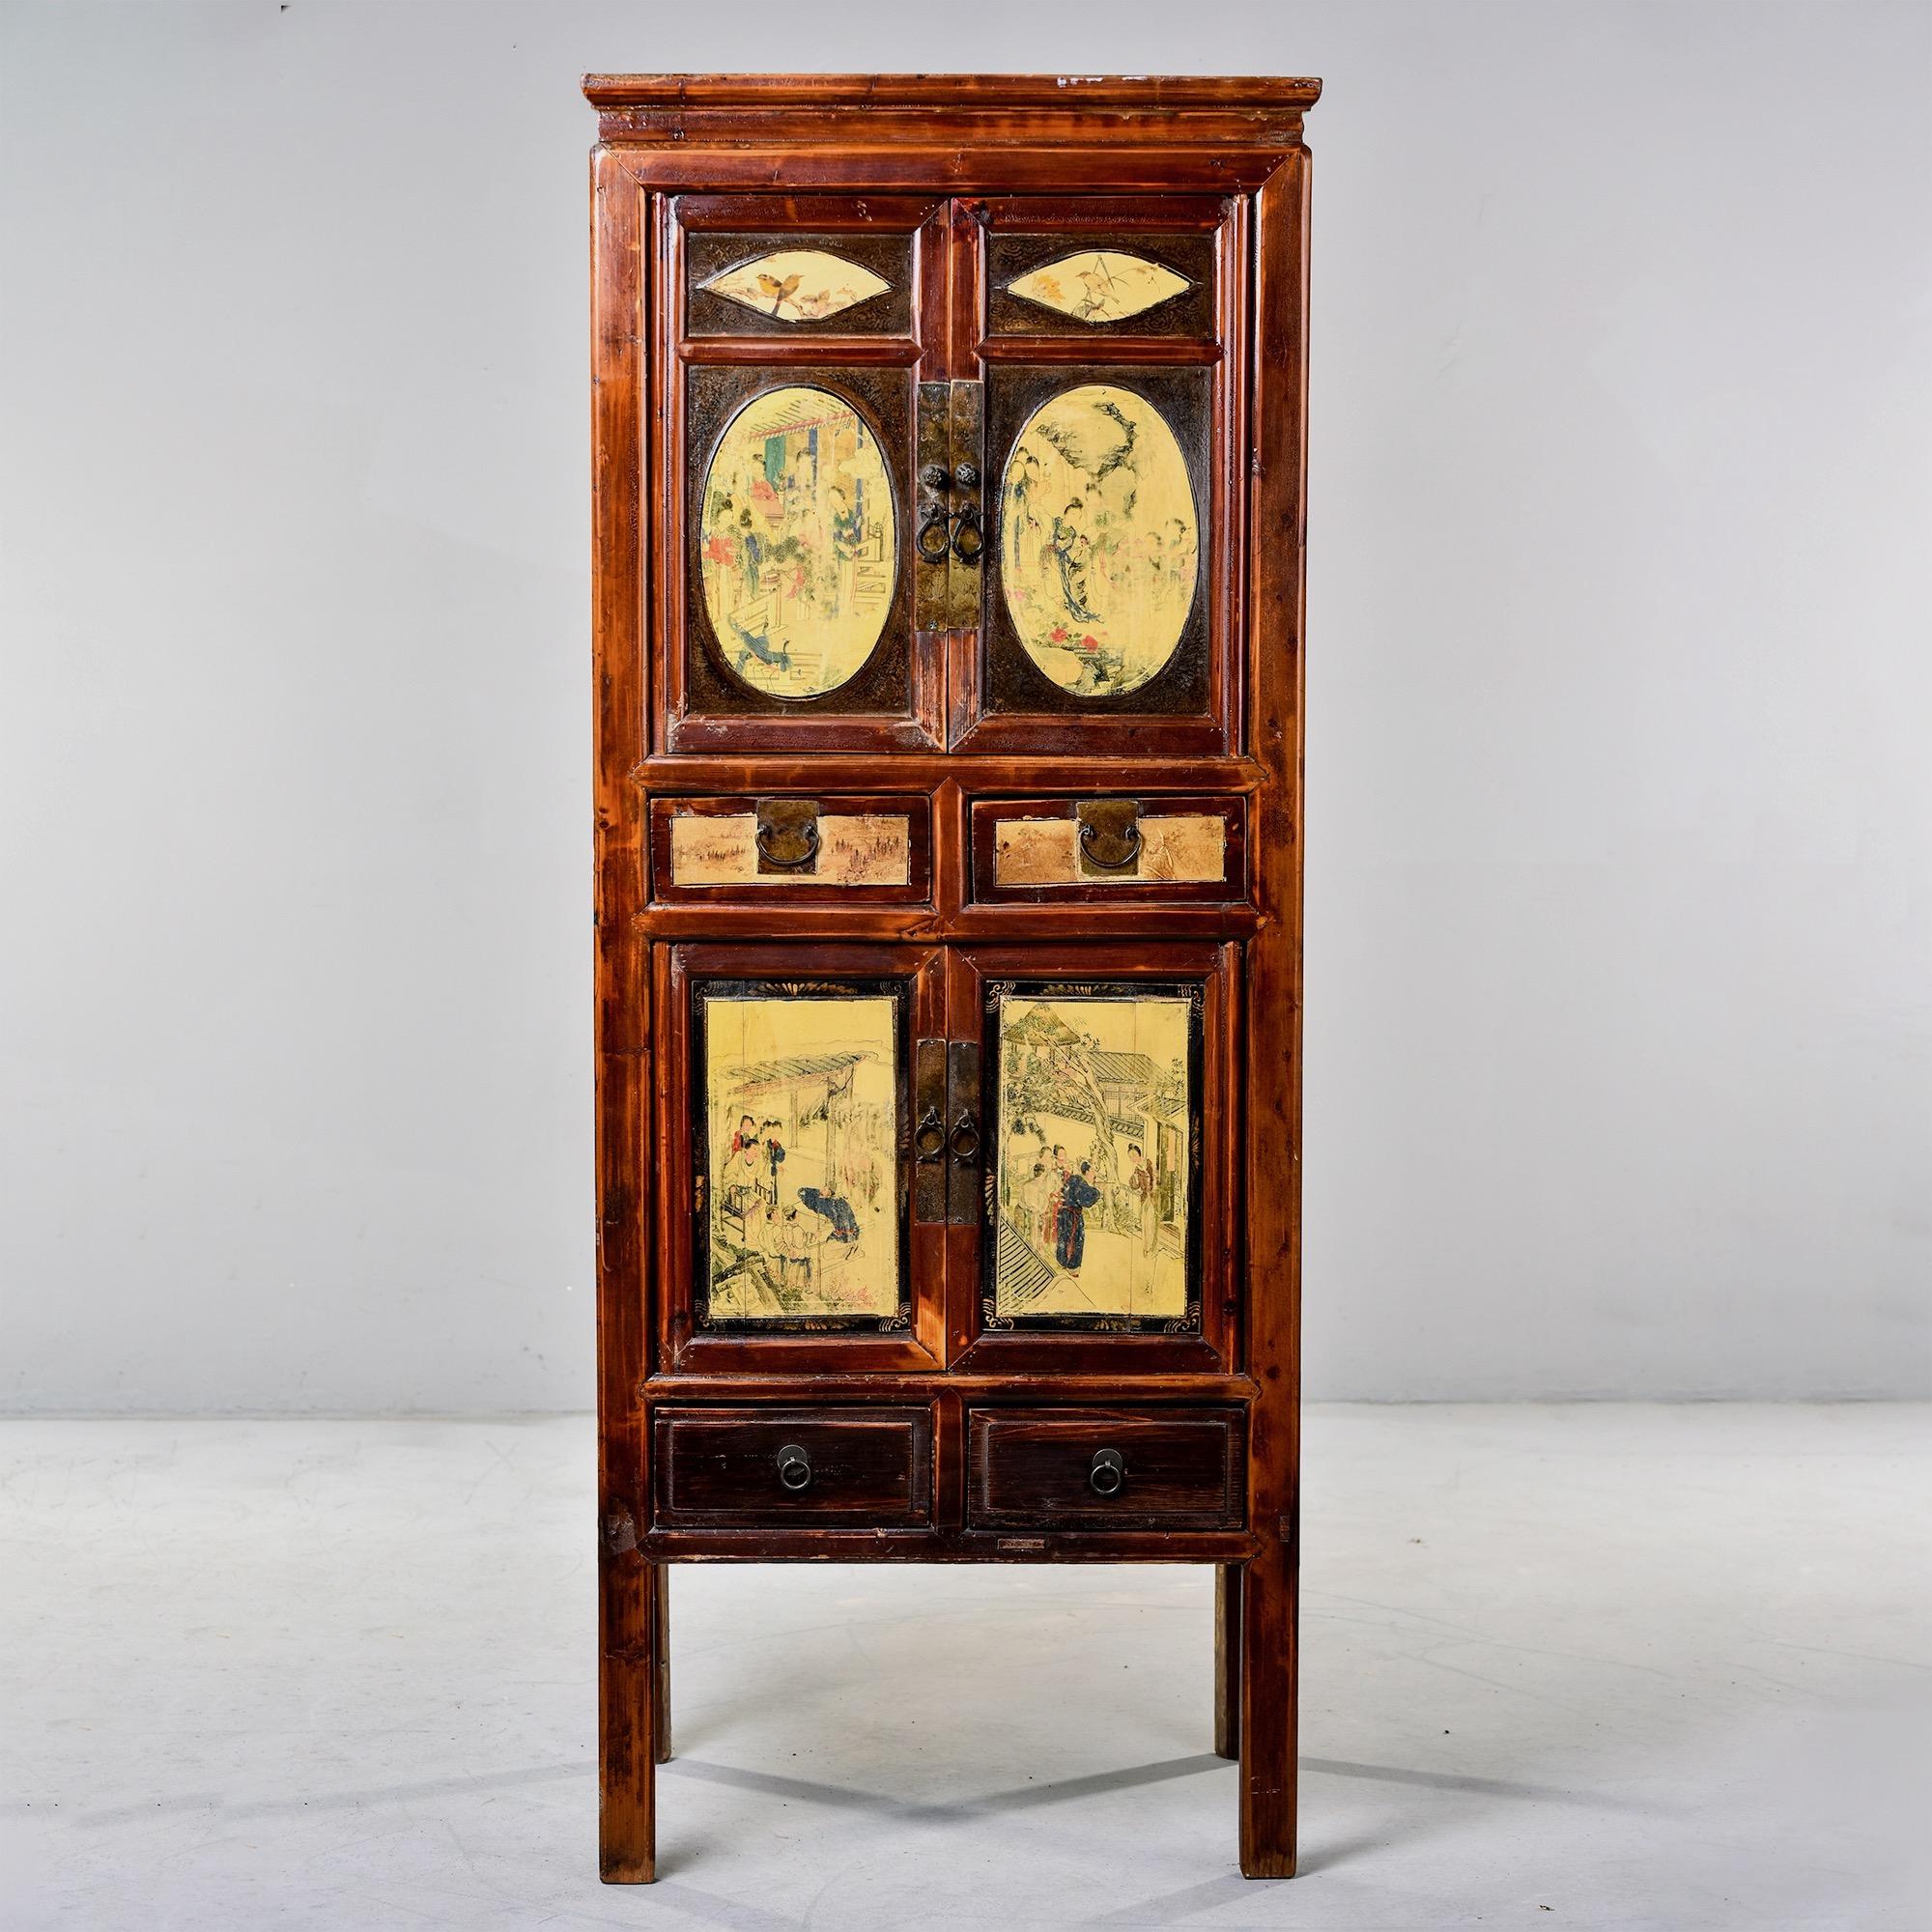 Circa 1910 tall Chinese cabinet features a top two door cabinet with a single internal shelf over two small drawers. The lower cabinet has two doors over two small drawers as well. Mortis and tenon construction. We were told by the dealer we